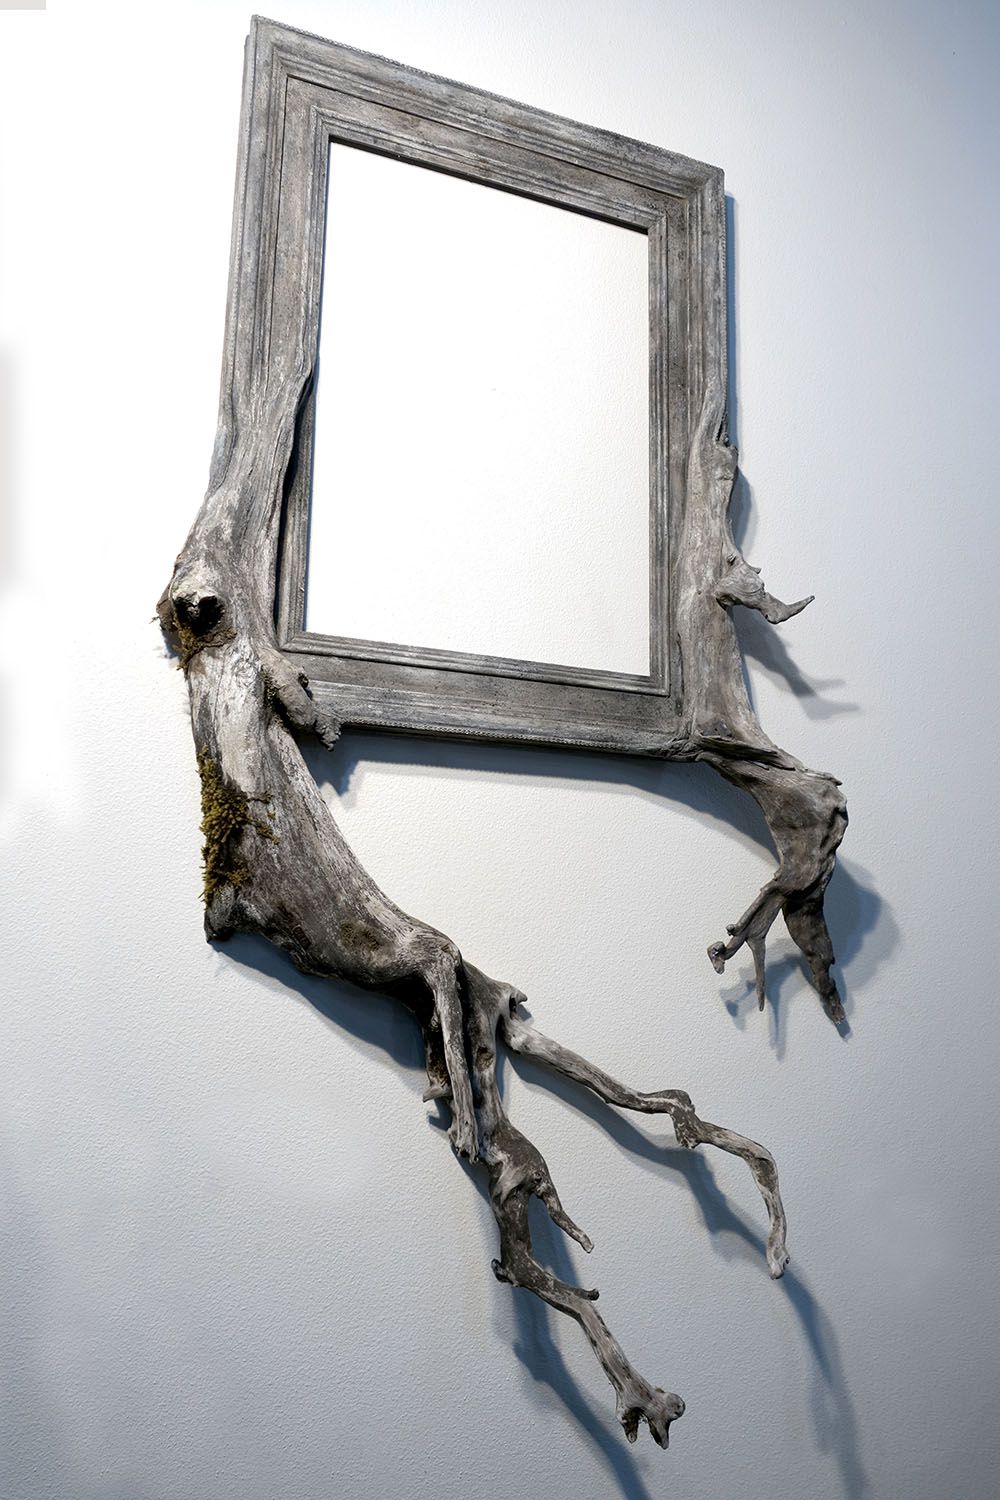 Tree Roots And Branches Fused With Ornate Picture Frames By Darryl Cox 11